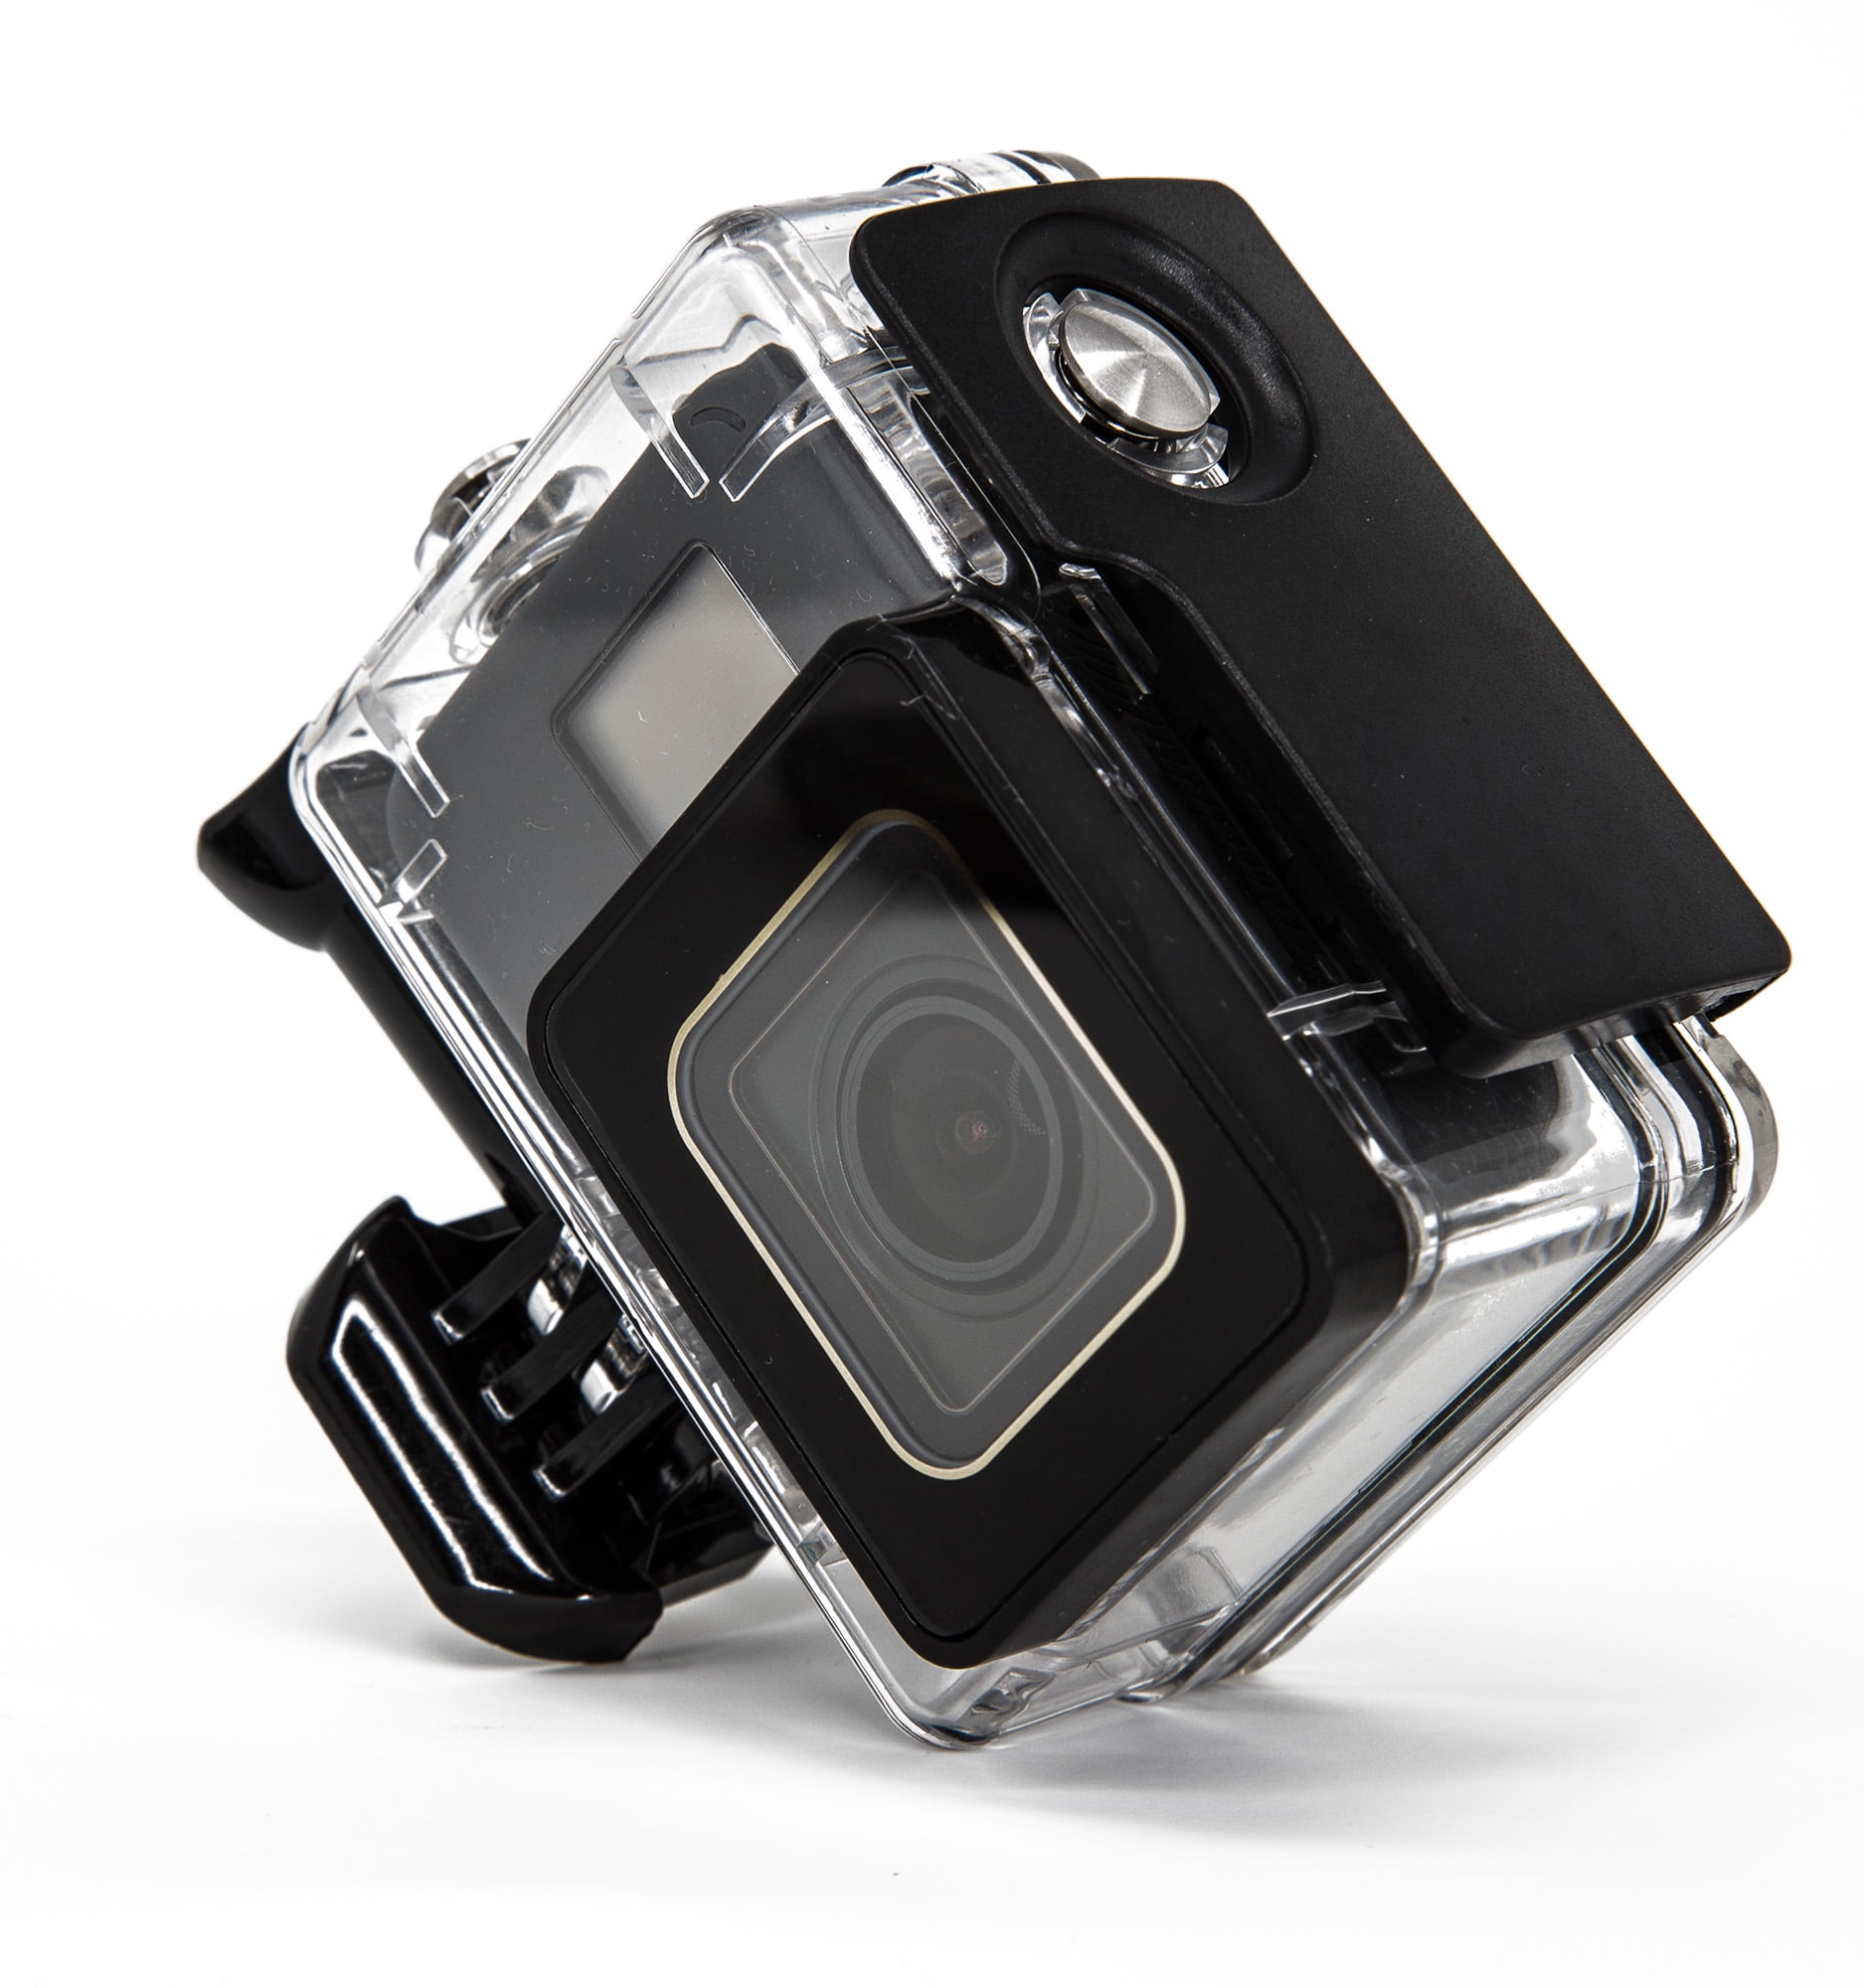 ST-214 Waterproof Protective Skeleton Housing Case with Bracket for GoPro HERO5 Session/GoPro HERO4 Session Durable 